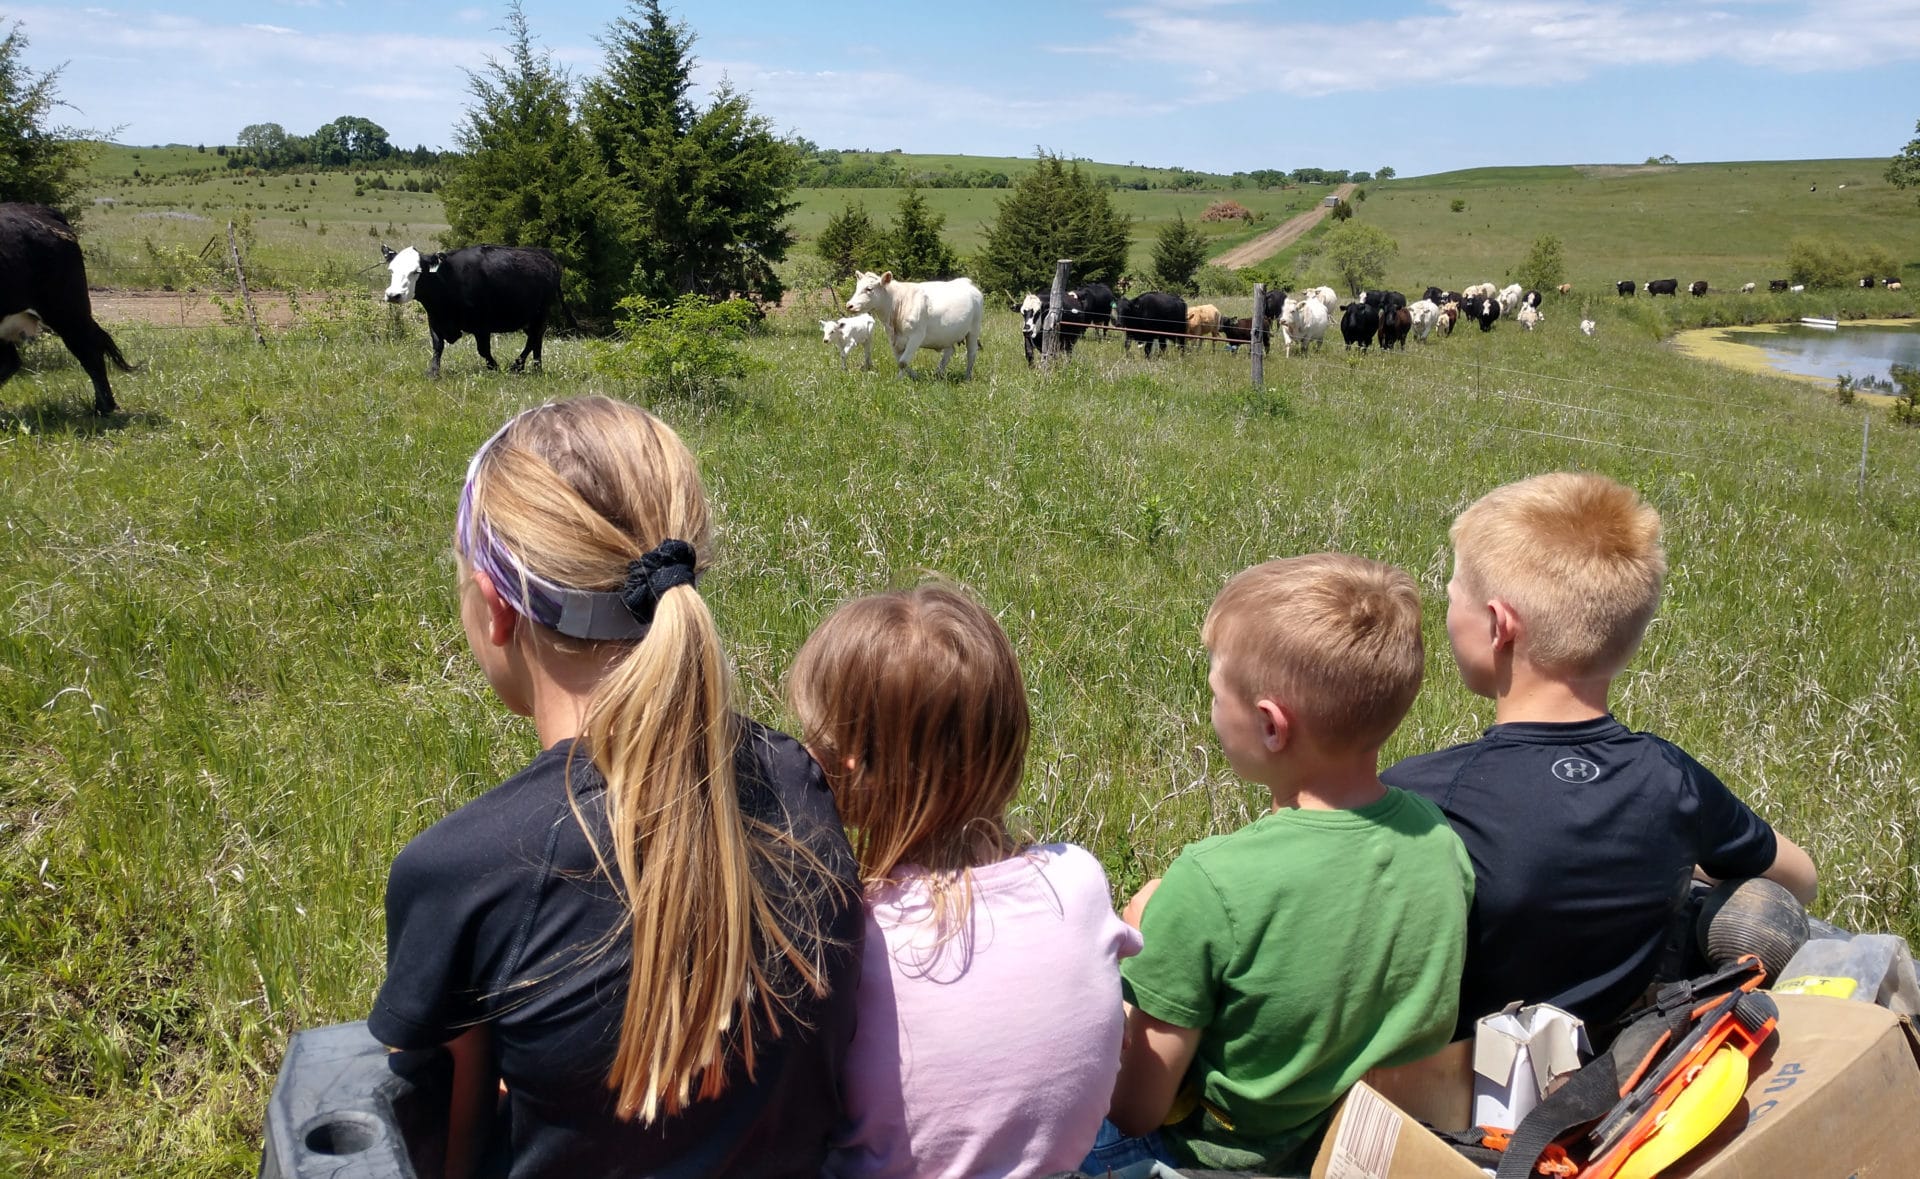 While out in our pasture last year oldest daughter, Claire, told her father, “You know Gabe would scold you. We’re over grazing this, Dad.” “She was right,” Ben said, “so we moved the cattle.” 